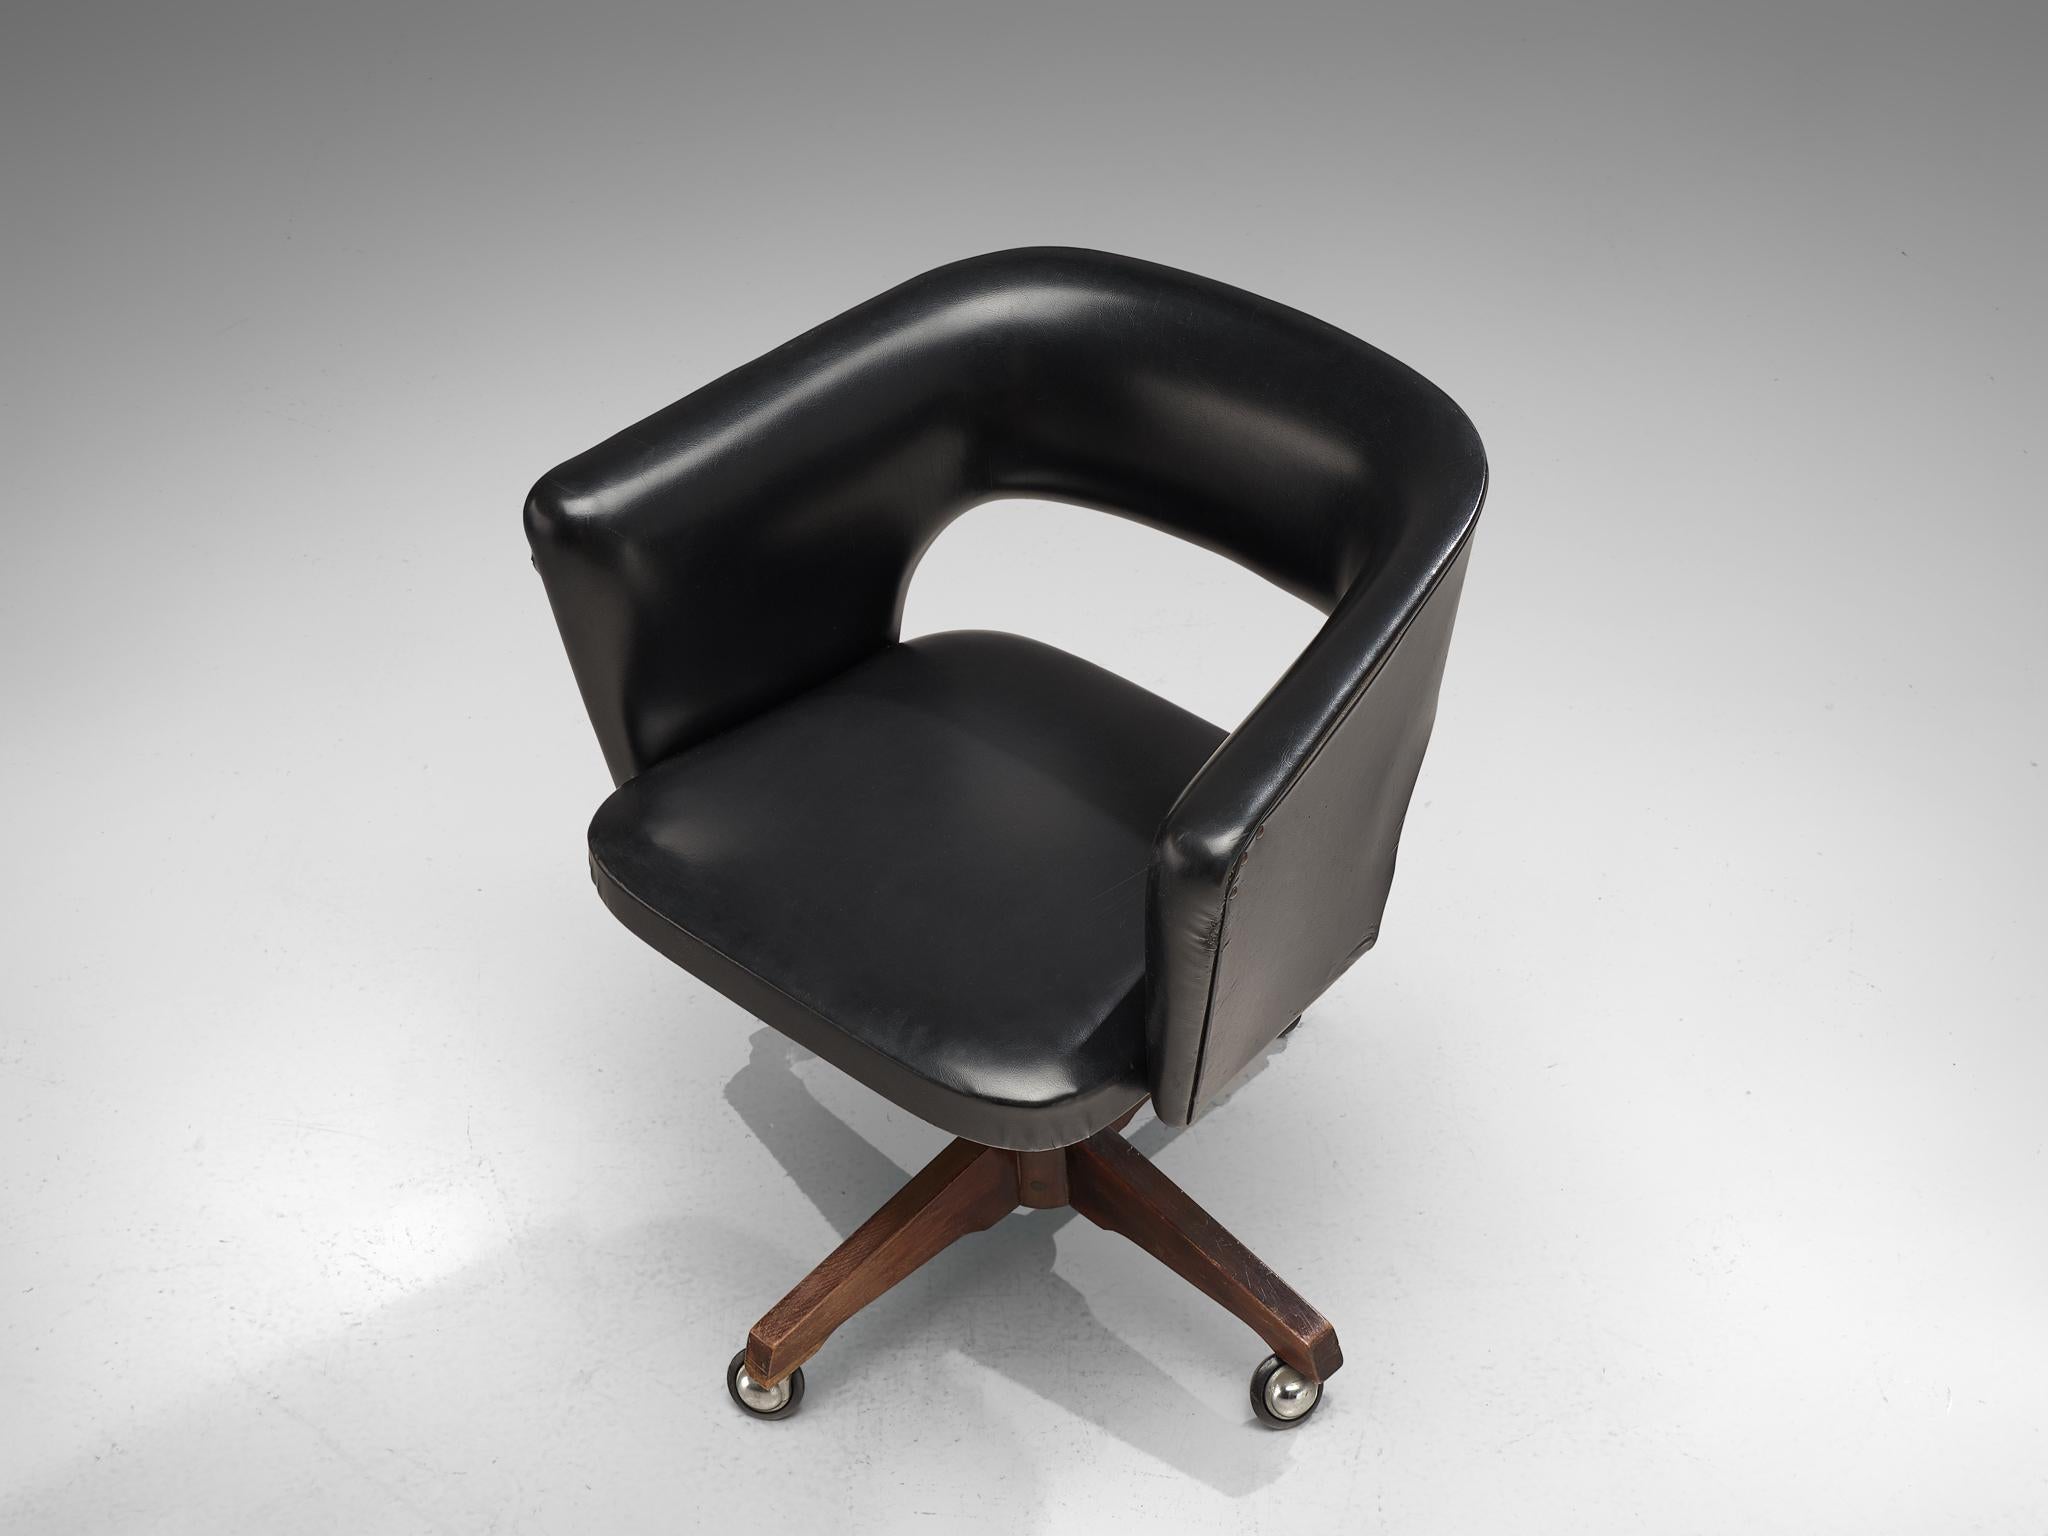 Vittorio Dassi, desk chair, metal, wood and leatherette, Italy, 1950s

Early swivel desk chair, designed by Vittorio Dassi. The seat cosists of a highback that flows over in the arms. The legs are made of wood with castered wheels, which makes this